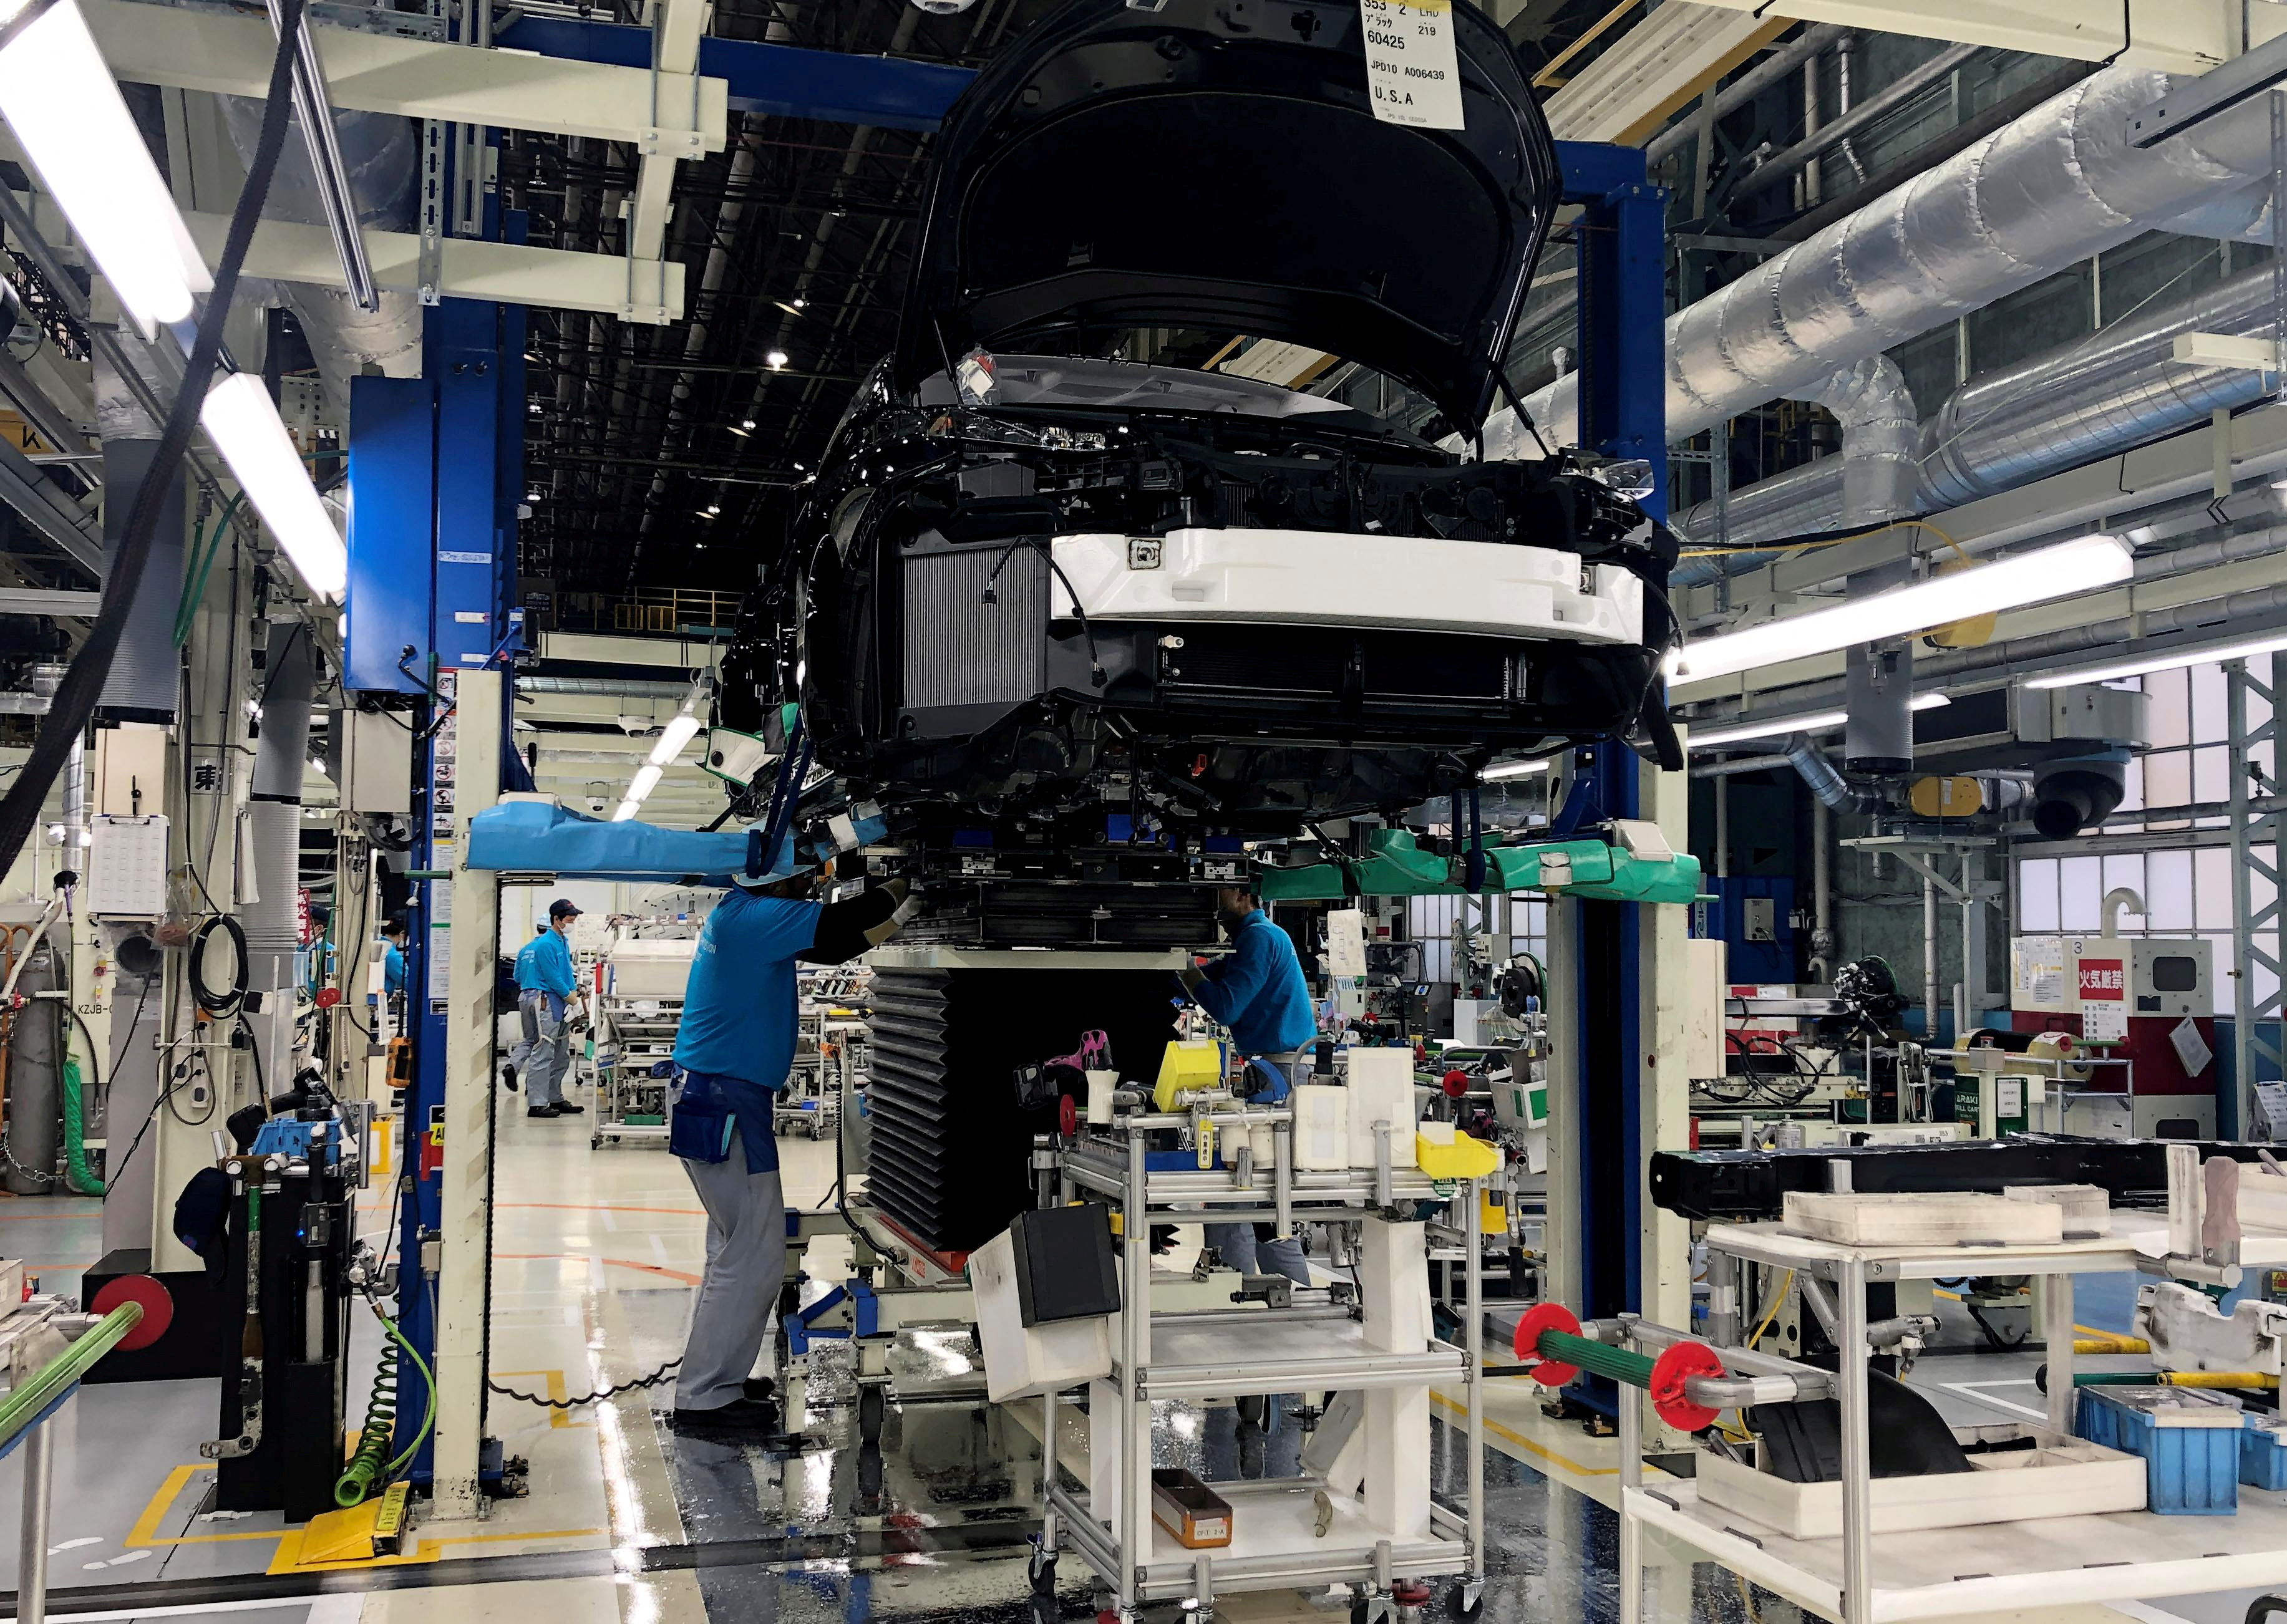 Workers install the fuel cell power system in a Toyota Mirai at a Toyota Motor Corp. factory in Toyota